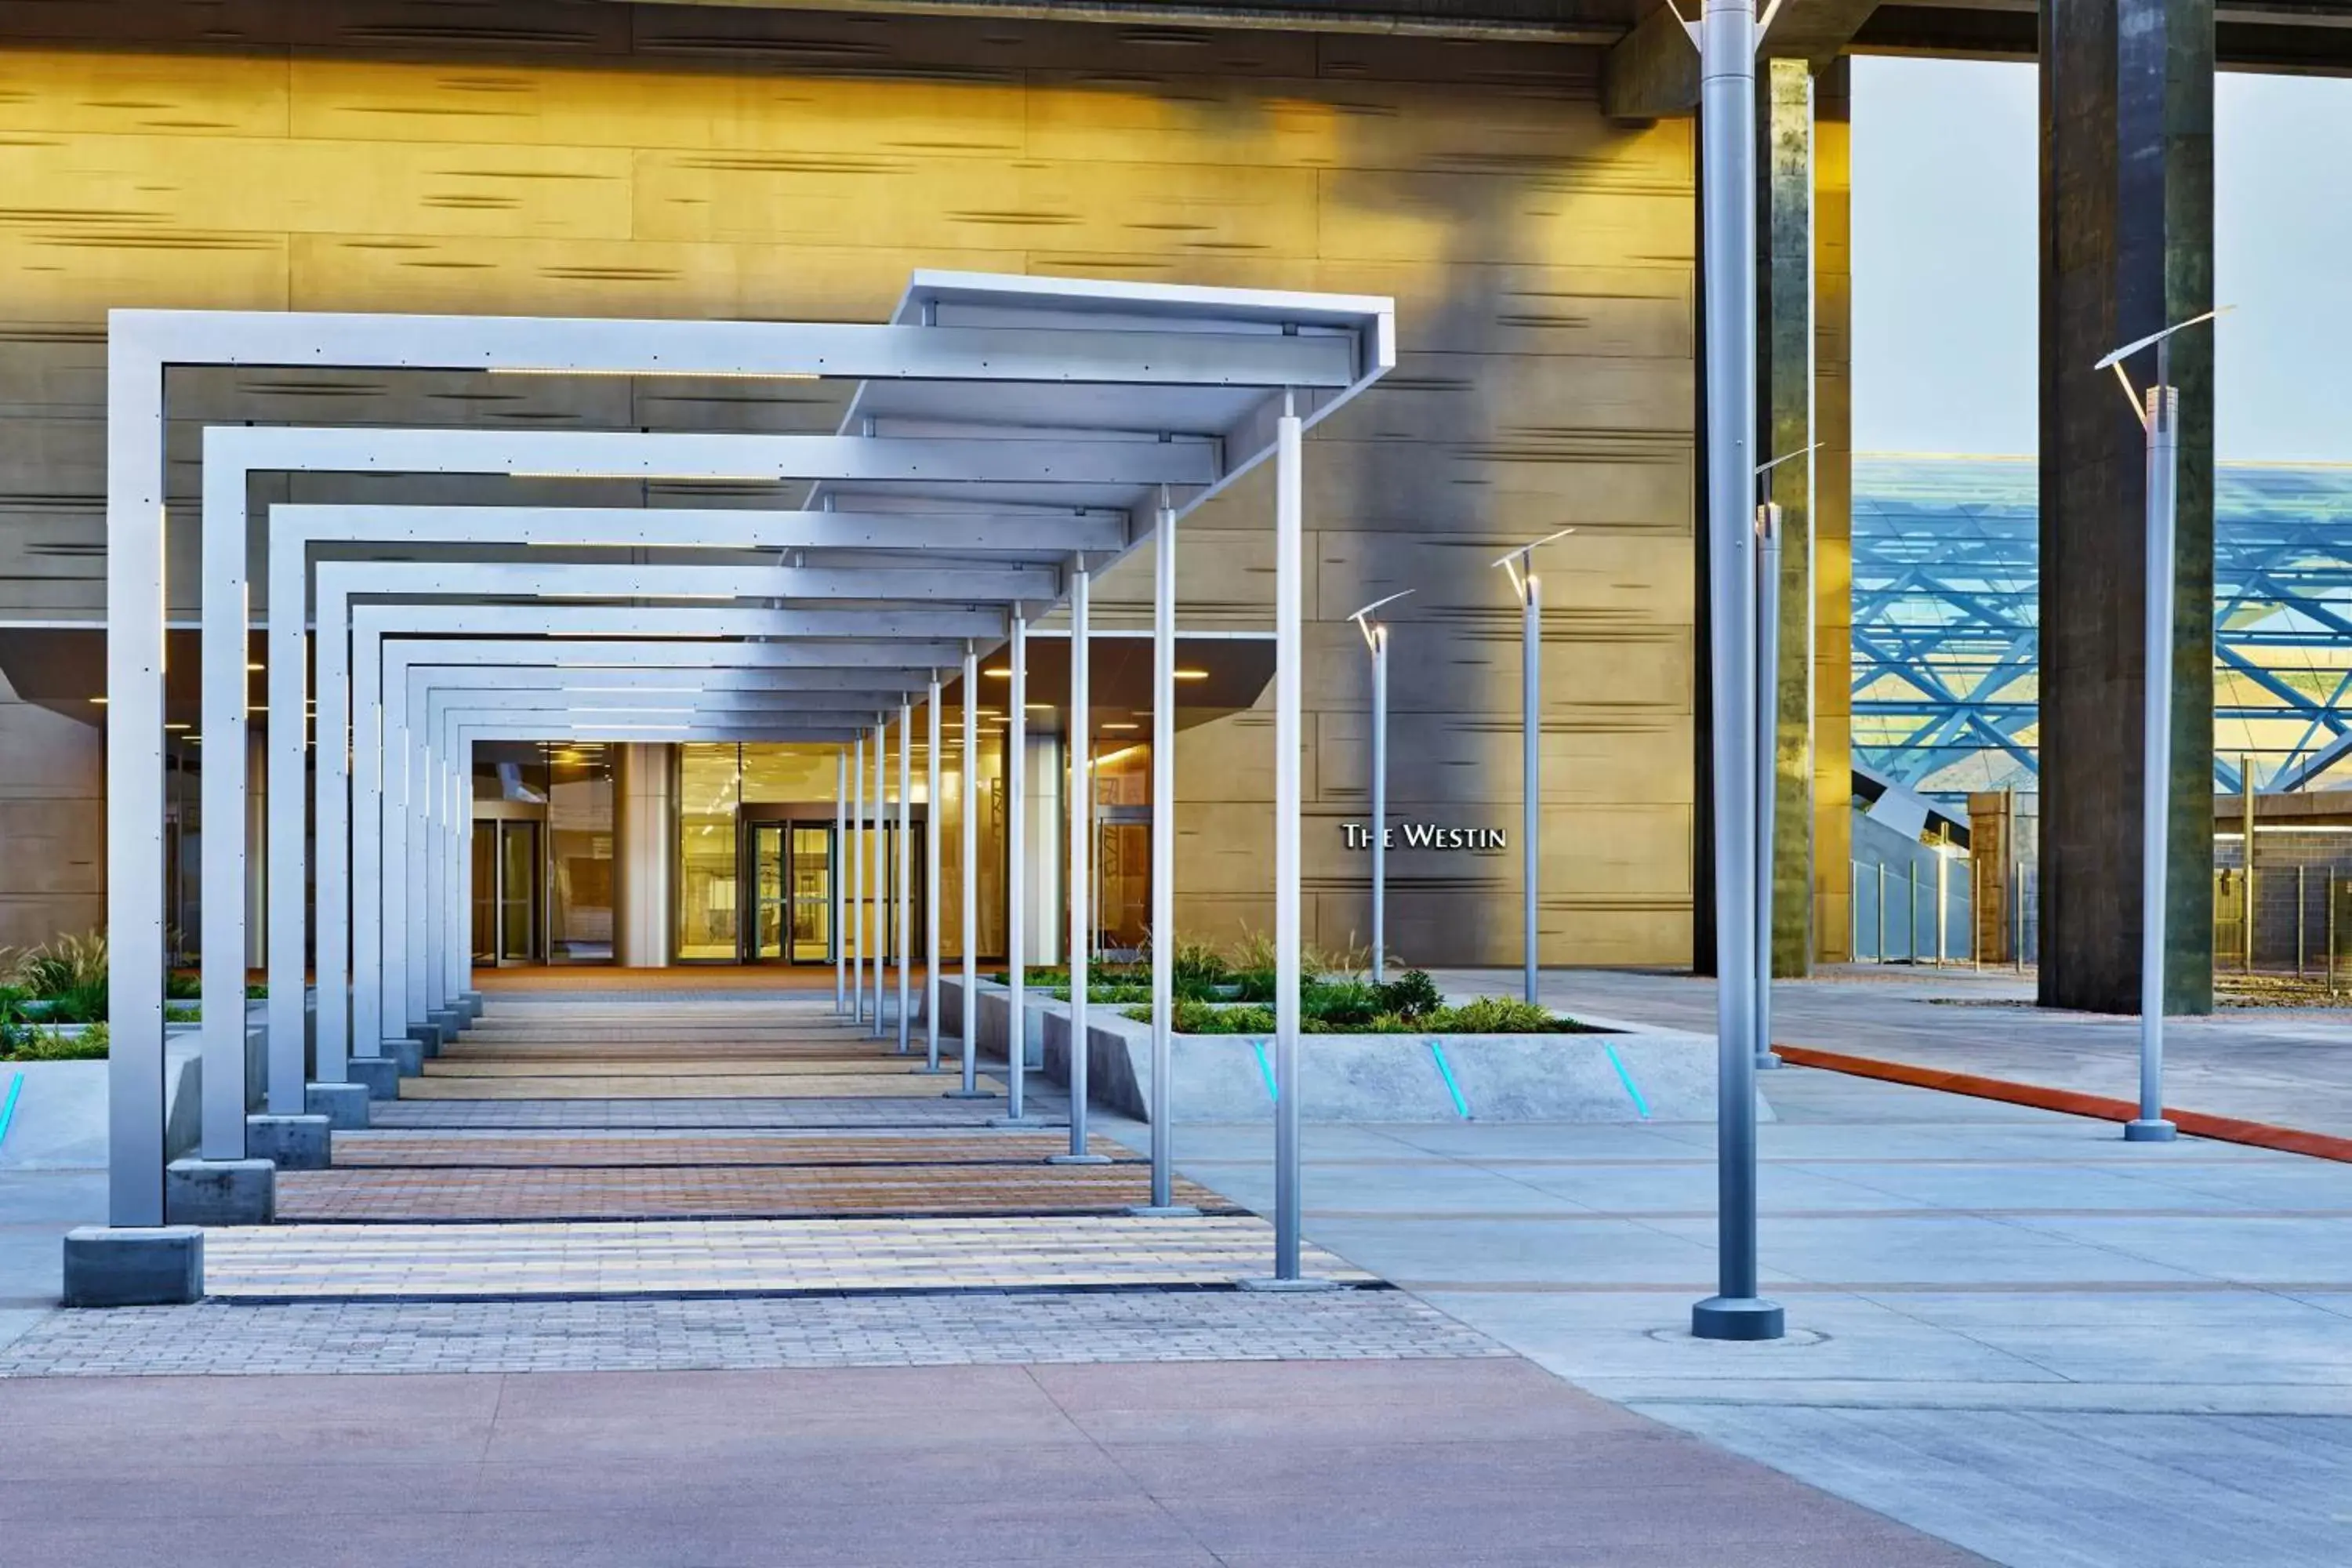 Property building in The Westin Denver International Airport